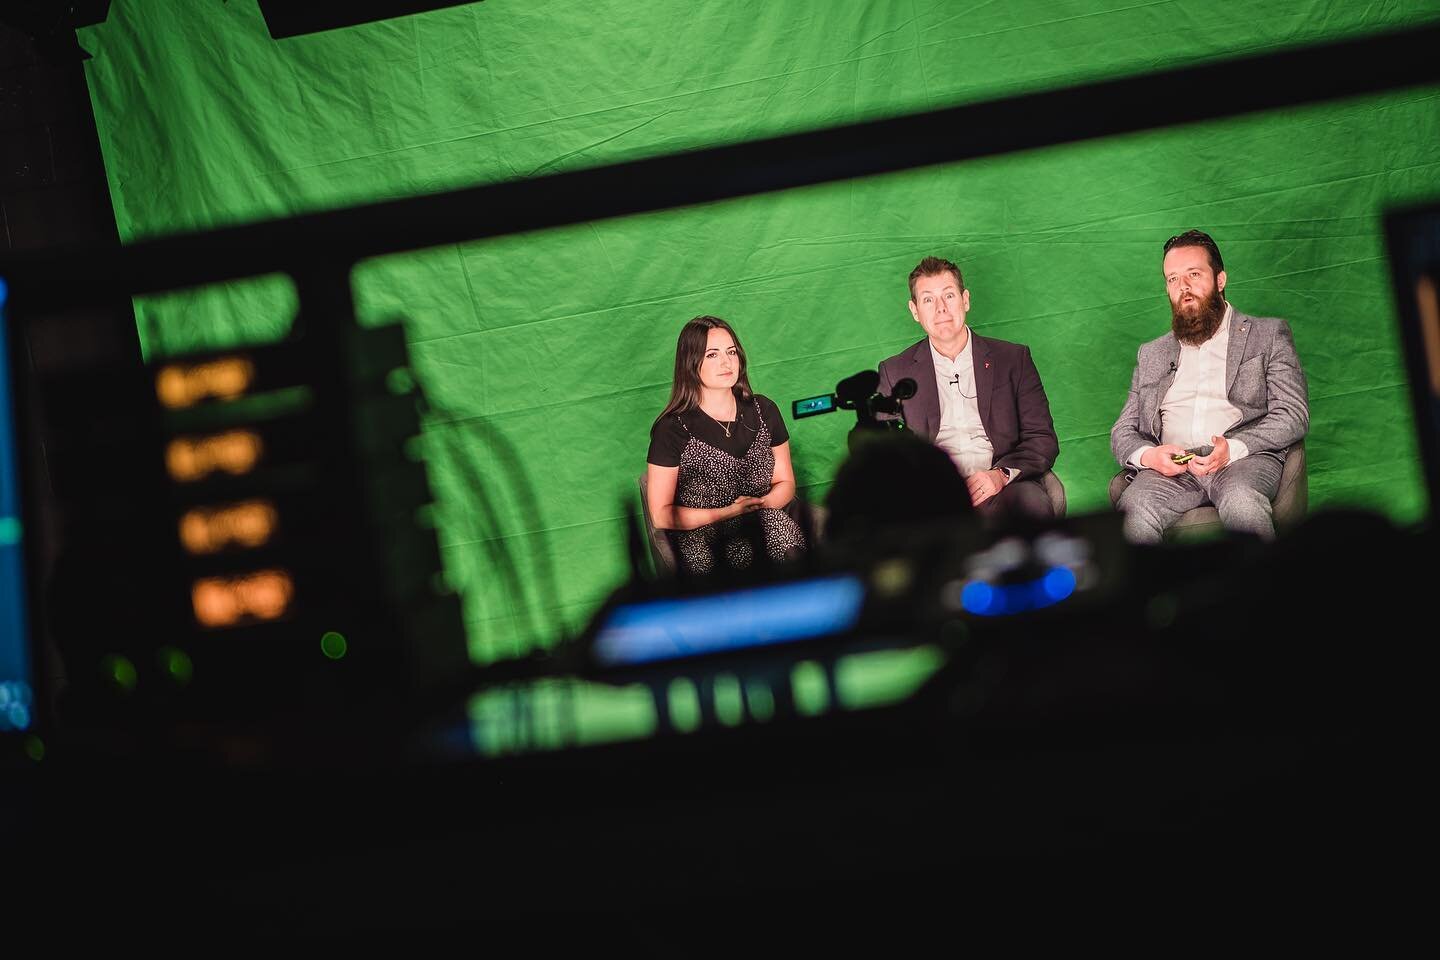 Great to host the Department for Enterprise and produce their live webinar on understanding Esports and the future of Esports here on the Isle of Man! 🎮🇮🇲
.
.
#Esports #Isleofman #iomstory #studio1 #greenscreen #greenscreenstudio #virtualstudio #p